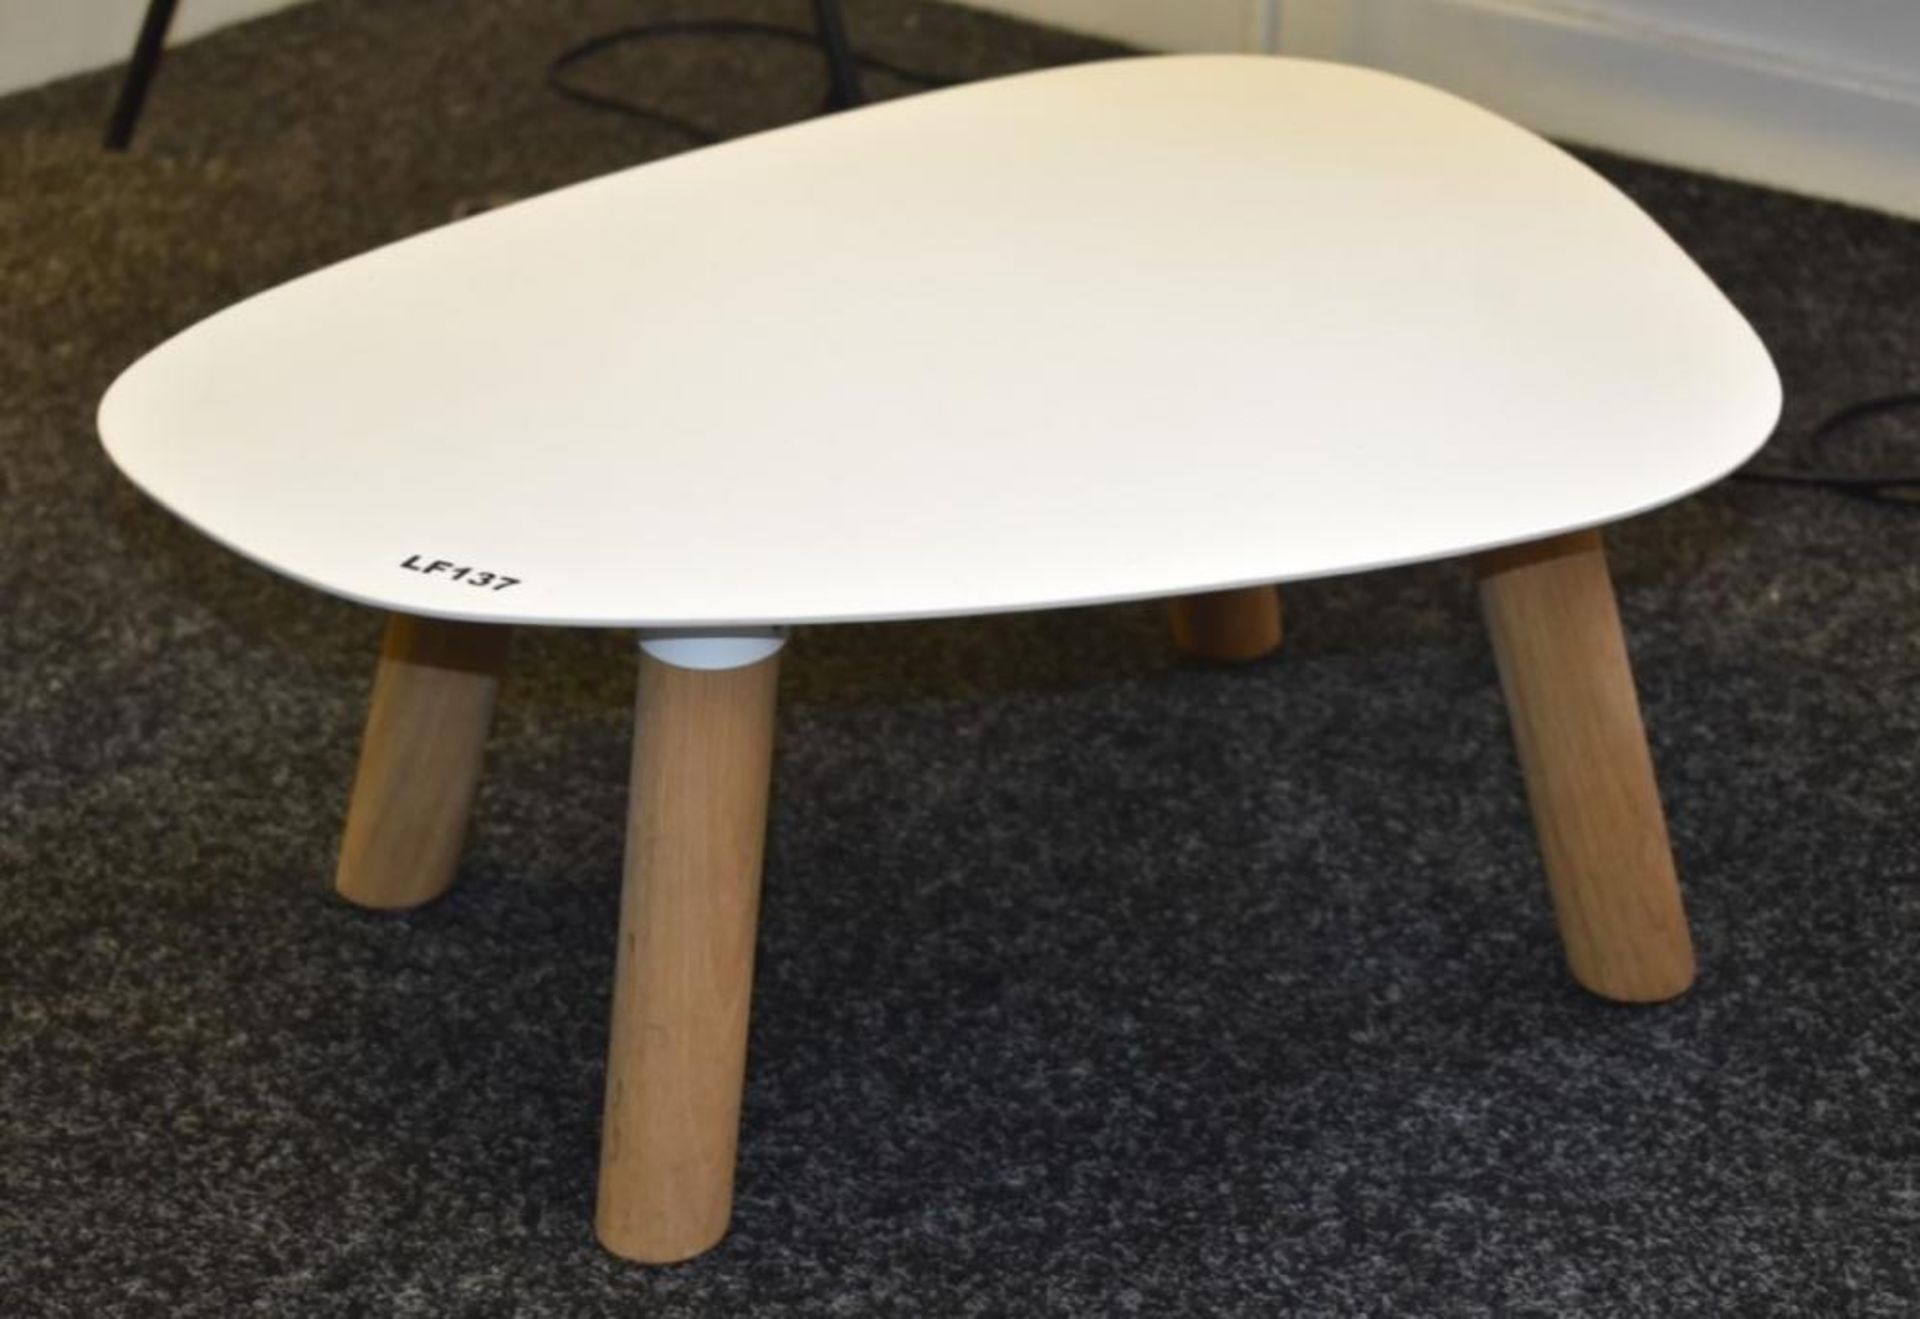 1 x Small Contemporary Side Table With Metal Shaped Top Finished in White and Wooden Legs - Dimensio